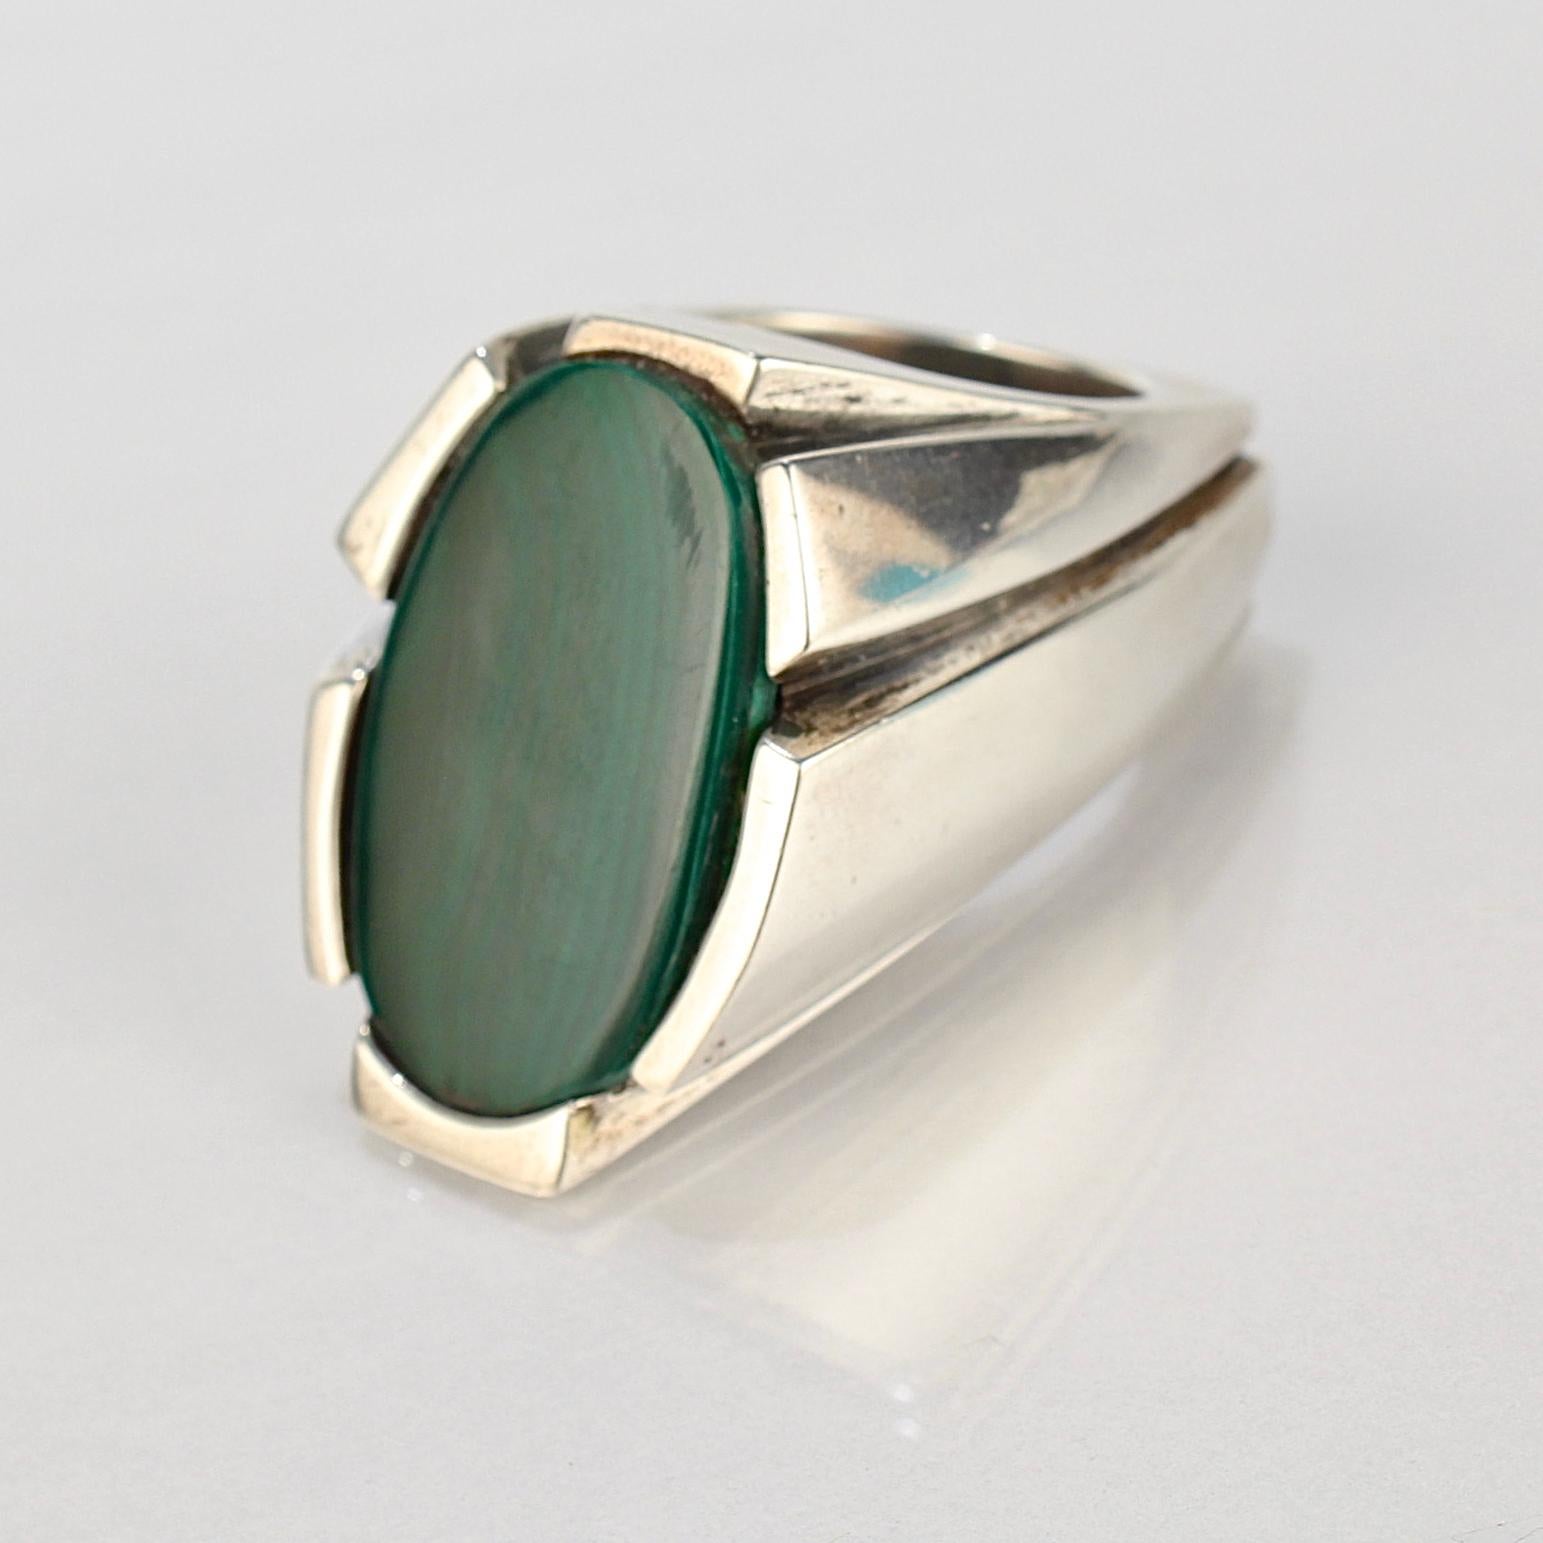 An impressive Wesley Emmons modernist signet ring.

Comprised of sterling silver, this stoutly made ring is set with a flat oval Malachite cabochon. It sits high on the finger and has great weight!

Emmons was an important jewelry maker in